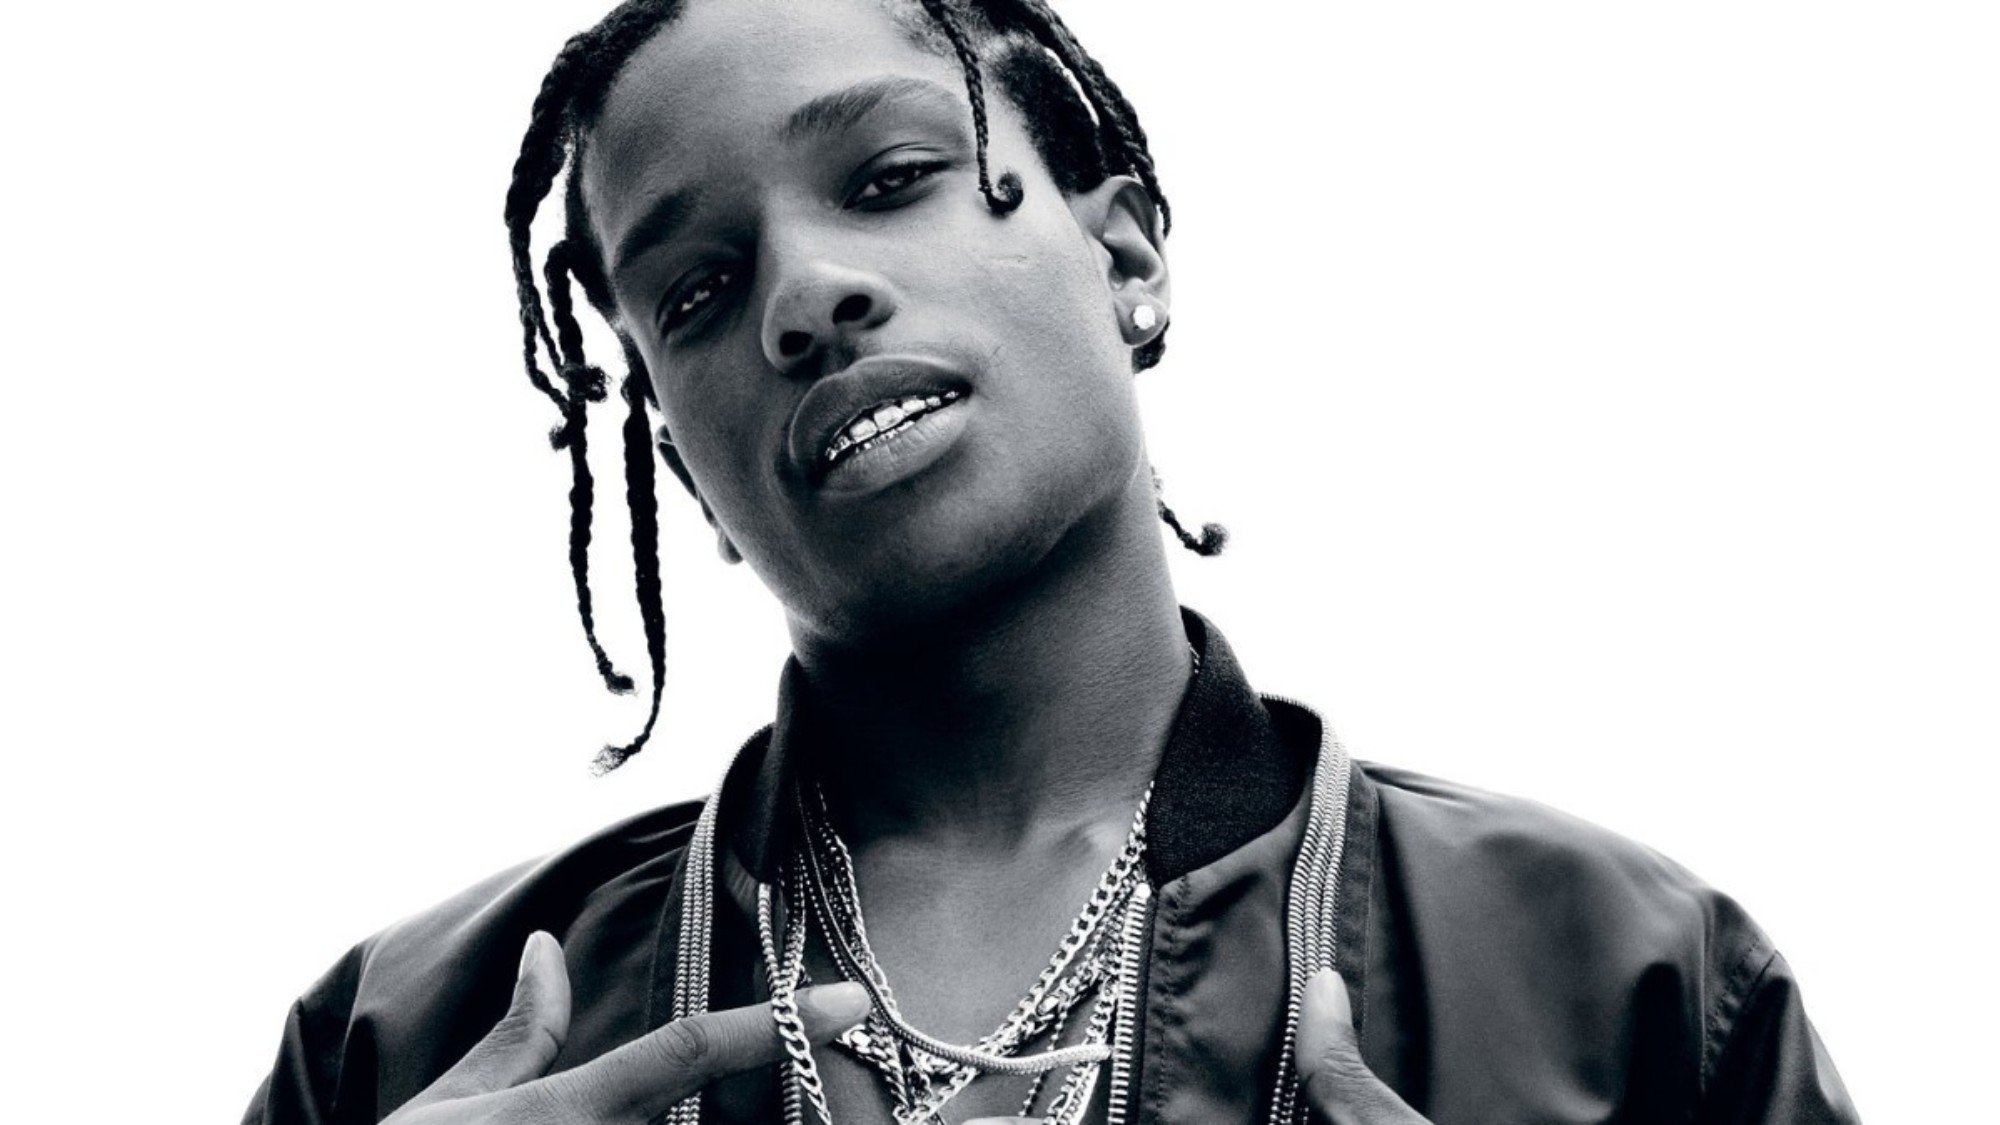 25 Hip ASAP Rocky Braids Styles For Guys With Long Hair